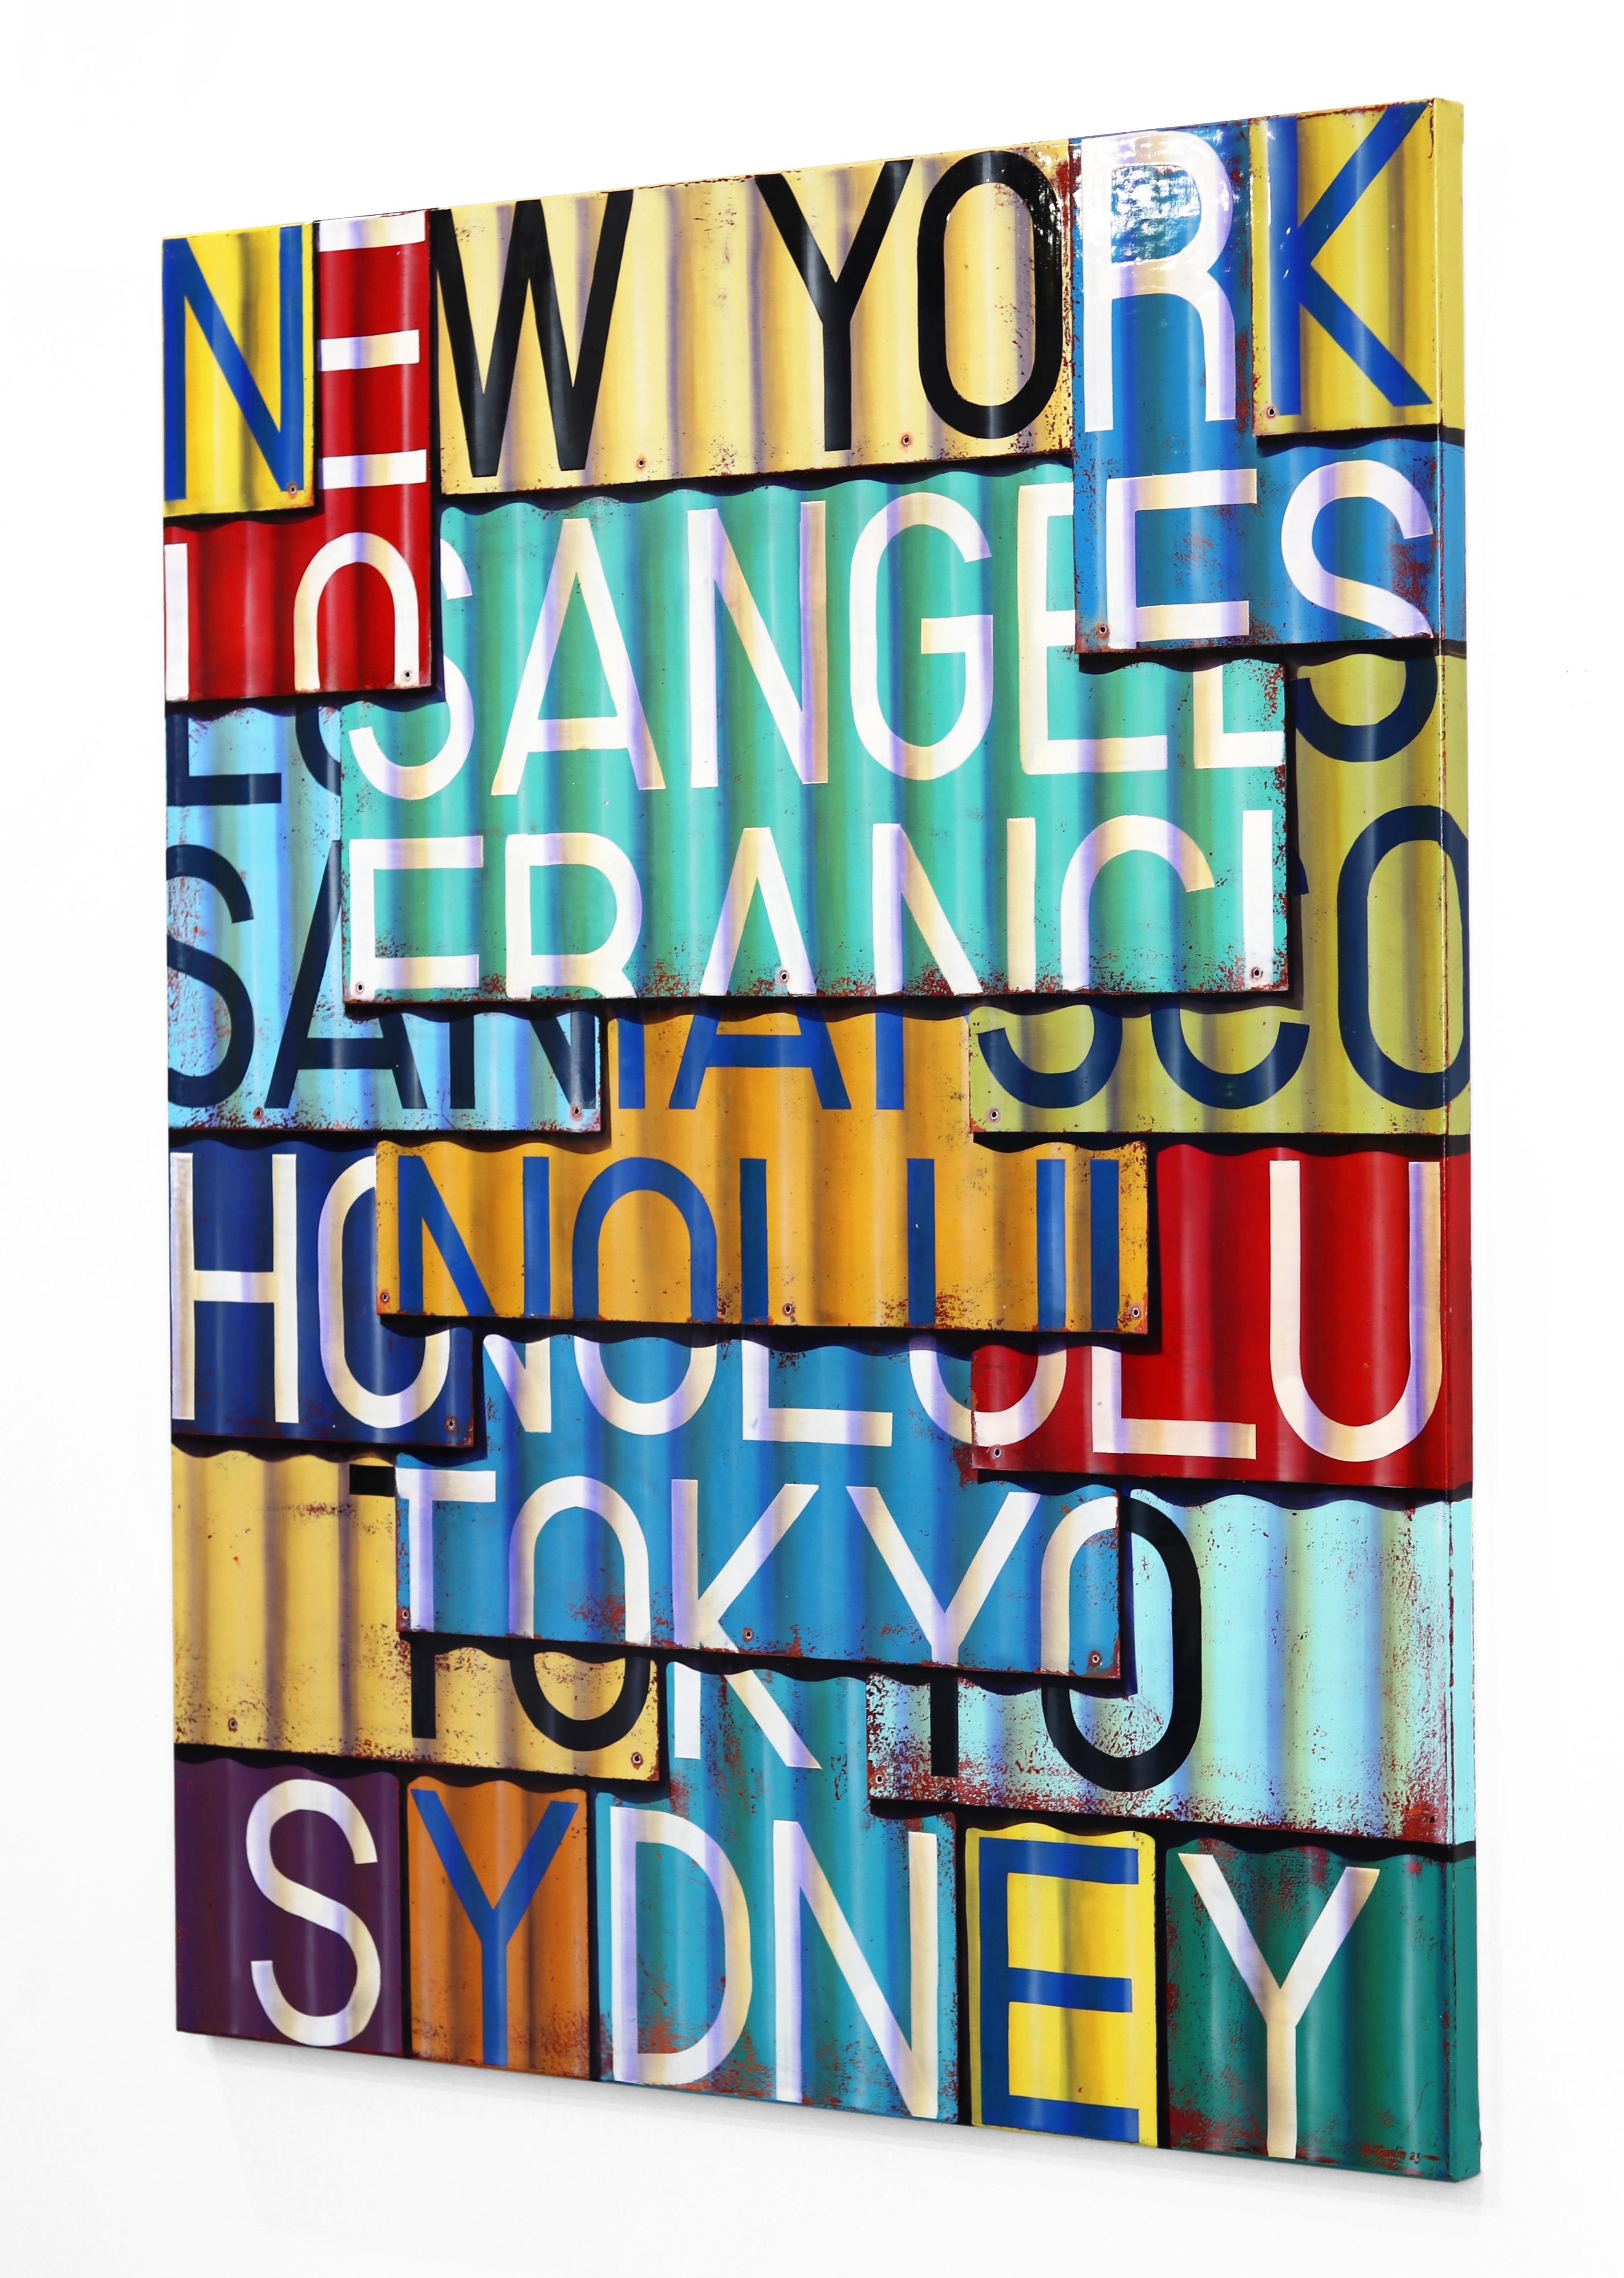 New York to Sydney via LAX, SFO, HNL, & TYO  - Photorealistic Painting on Canvas For Sale 2